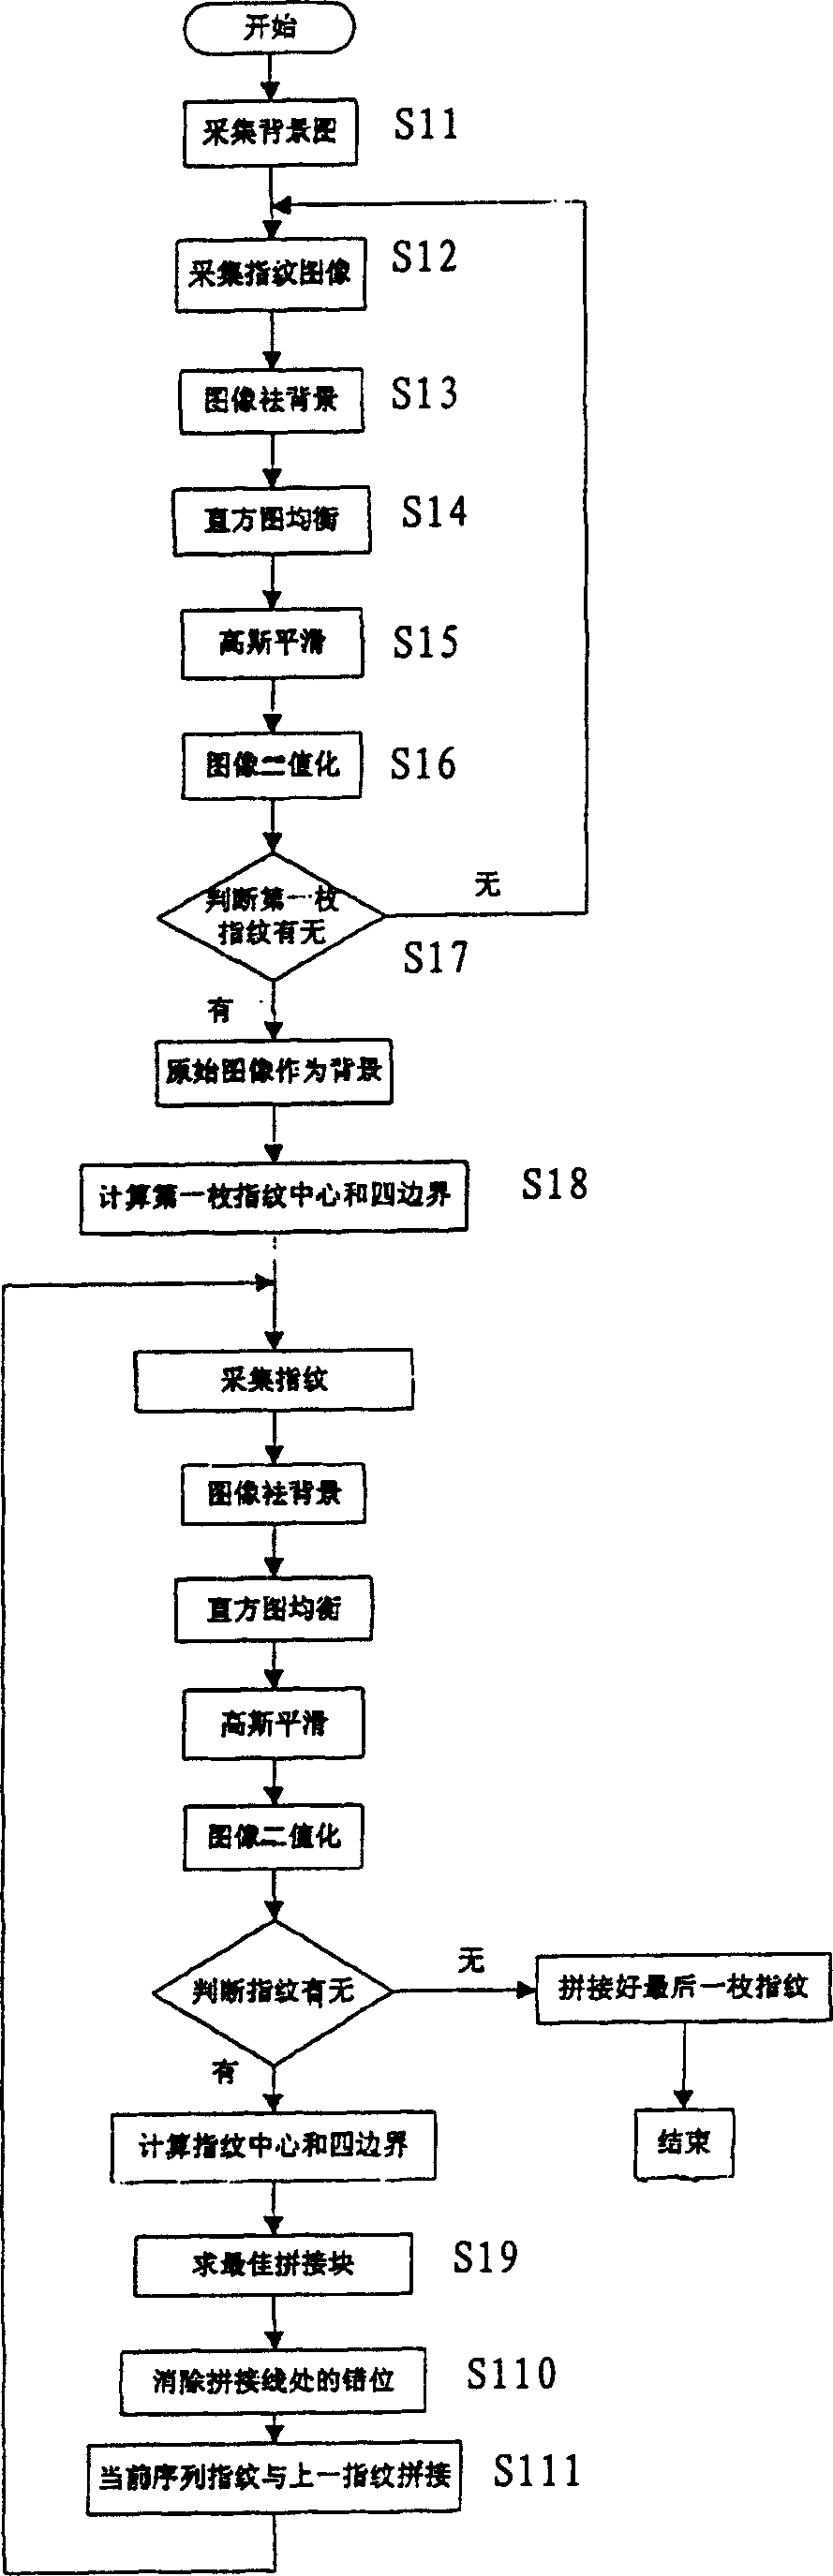 Acquisition and splicing method of three-face rolling fingerprint